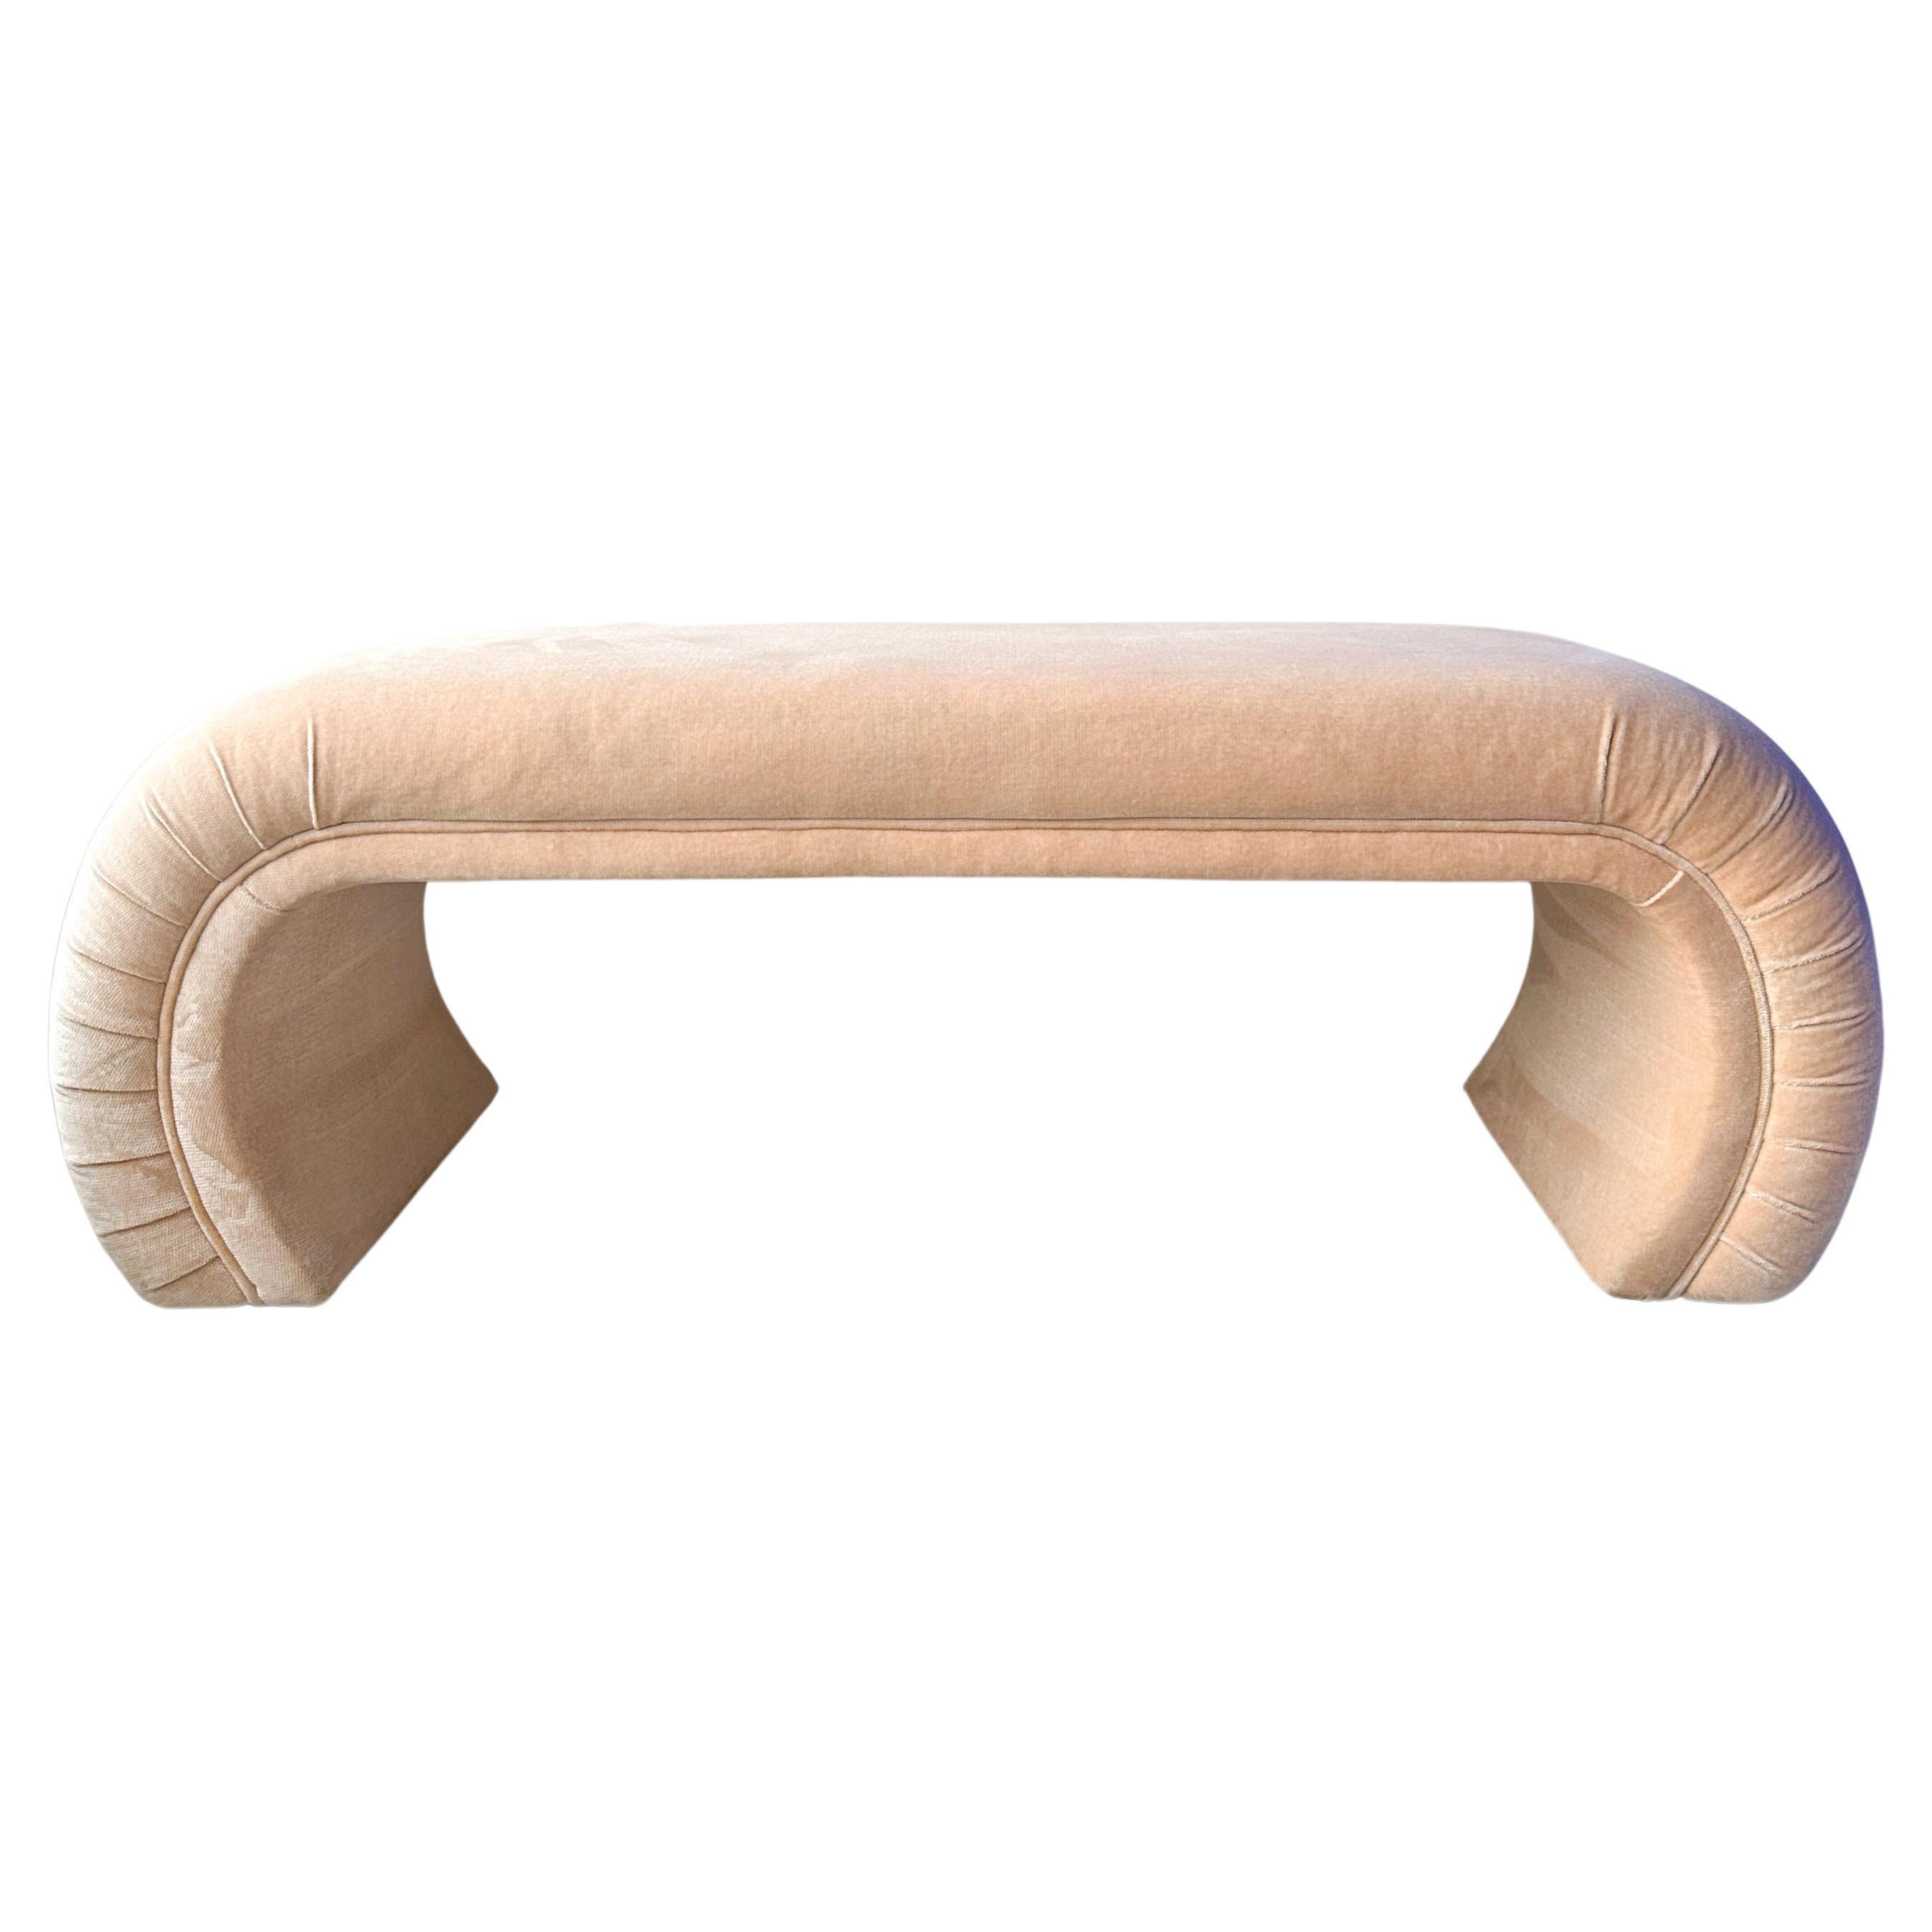 Directional Chenille Curved Waterfall Bench